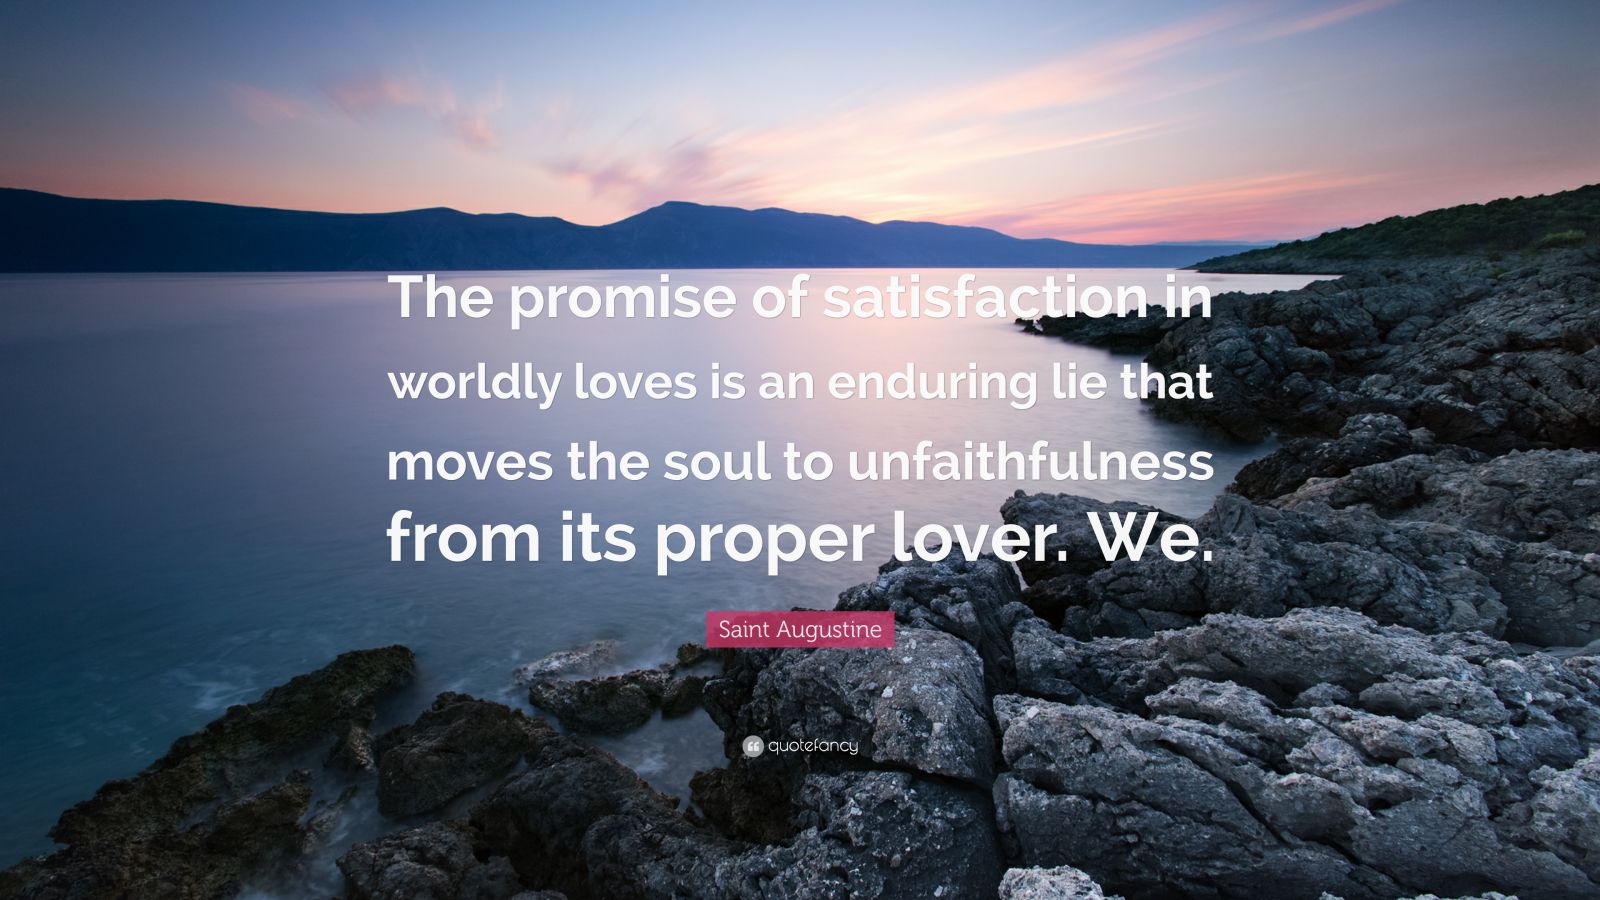 Saint Augustine Quote: “The promise of satisfaction in worldly loves is ...